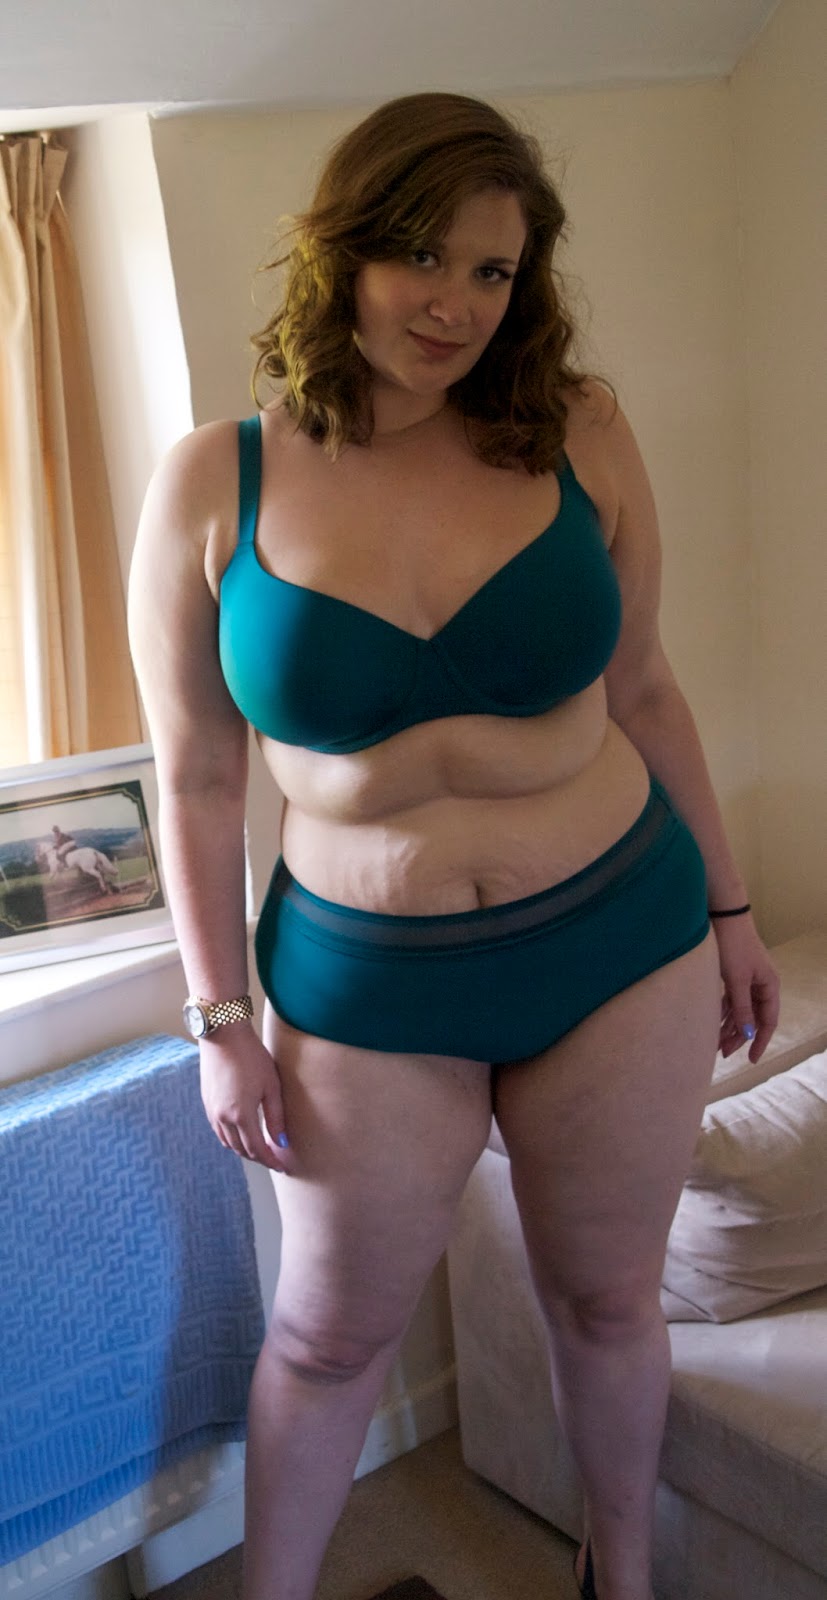 A Guide To Underwear By Curvy Girl Thin - She Might Be Loved